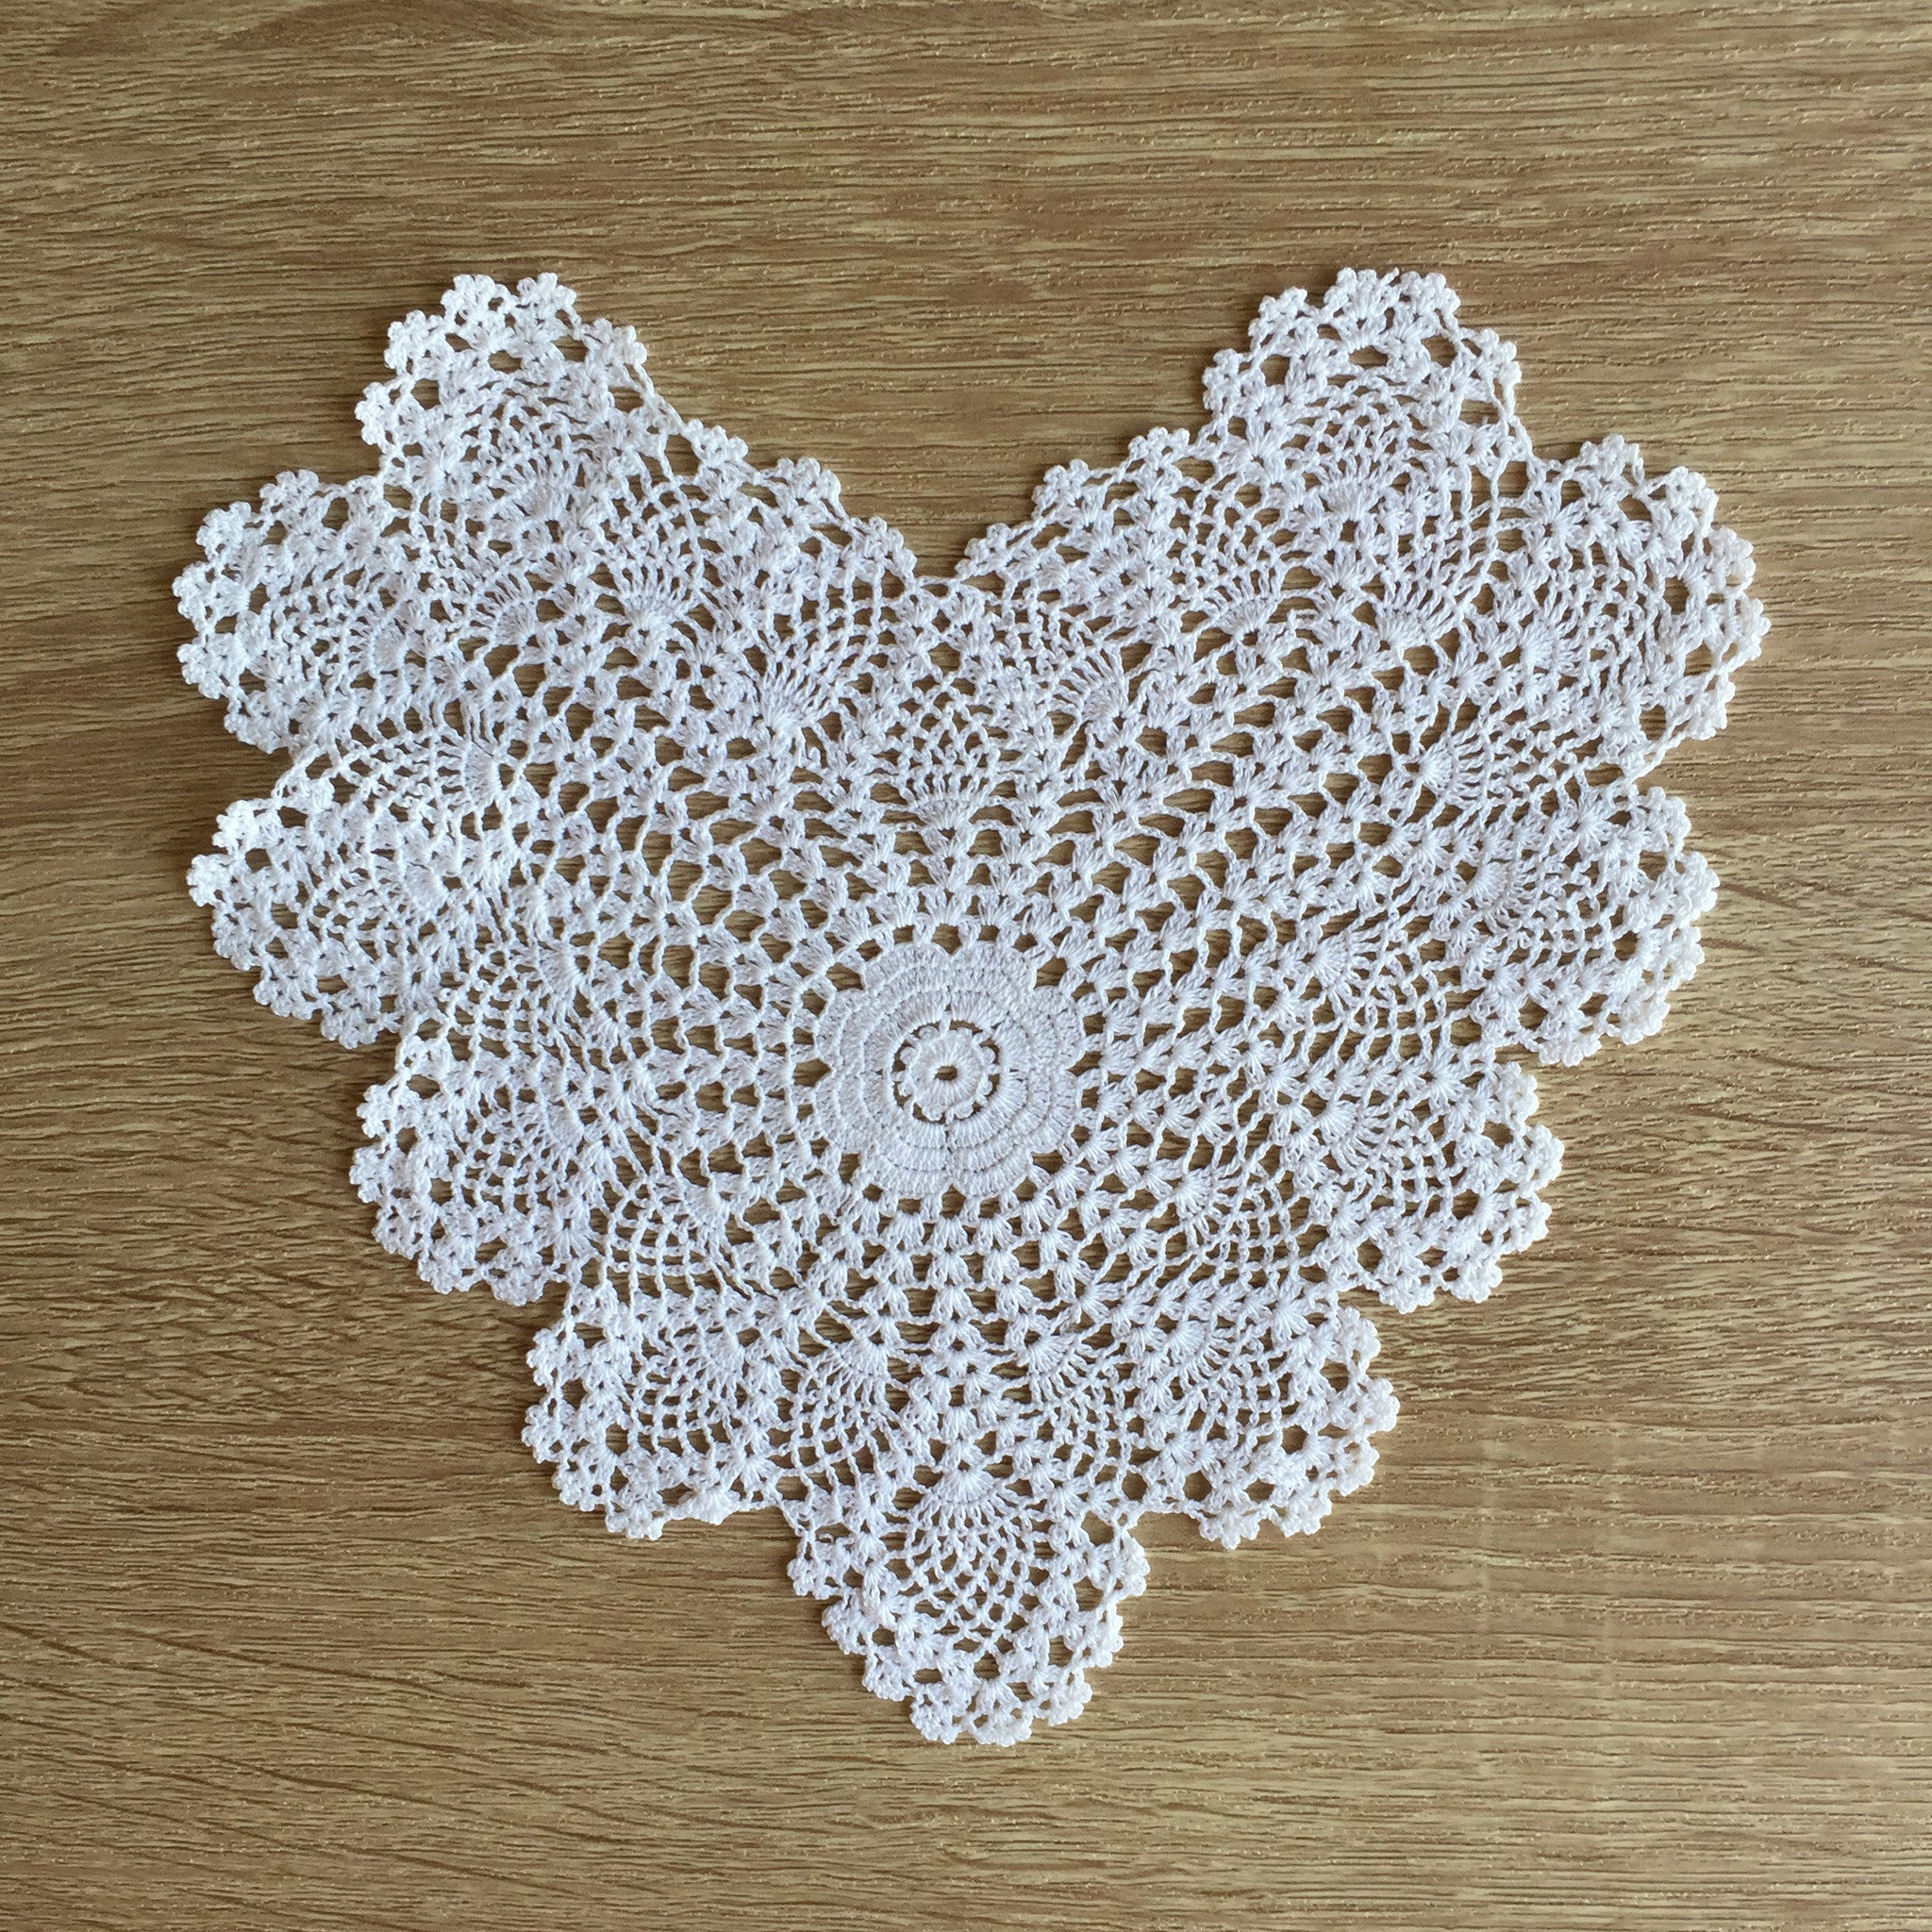 Pineapple Heart Shaped Doilies White 8" Inch Set of 12